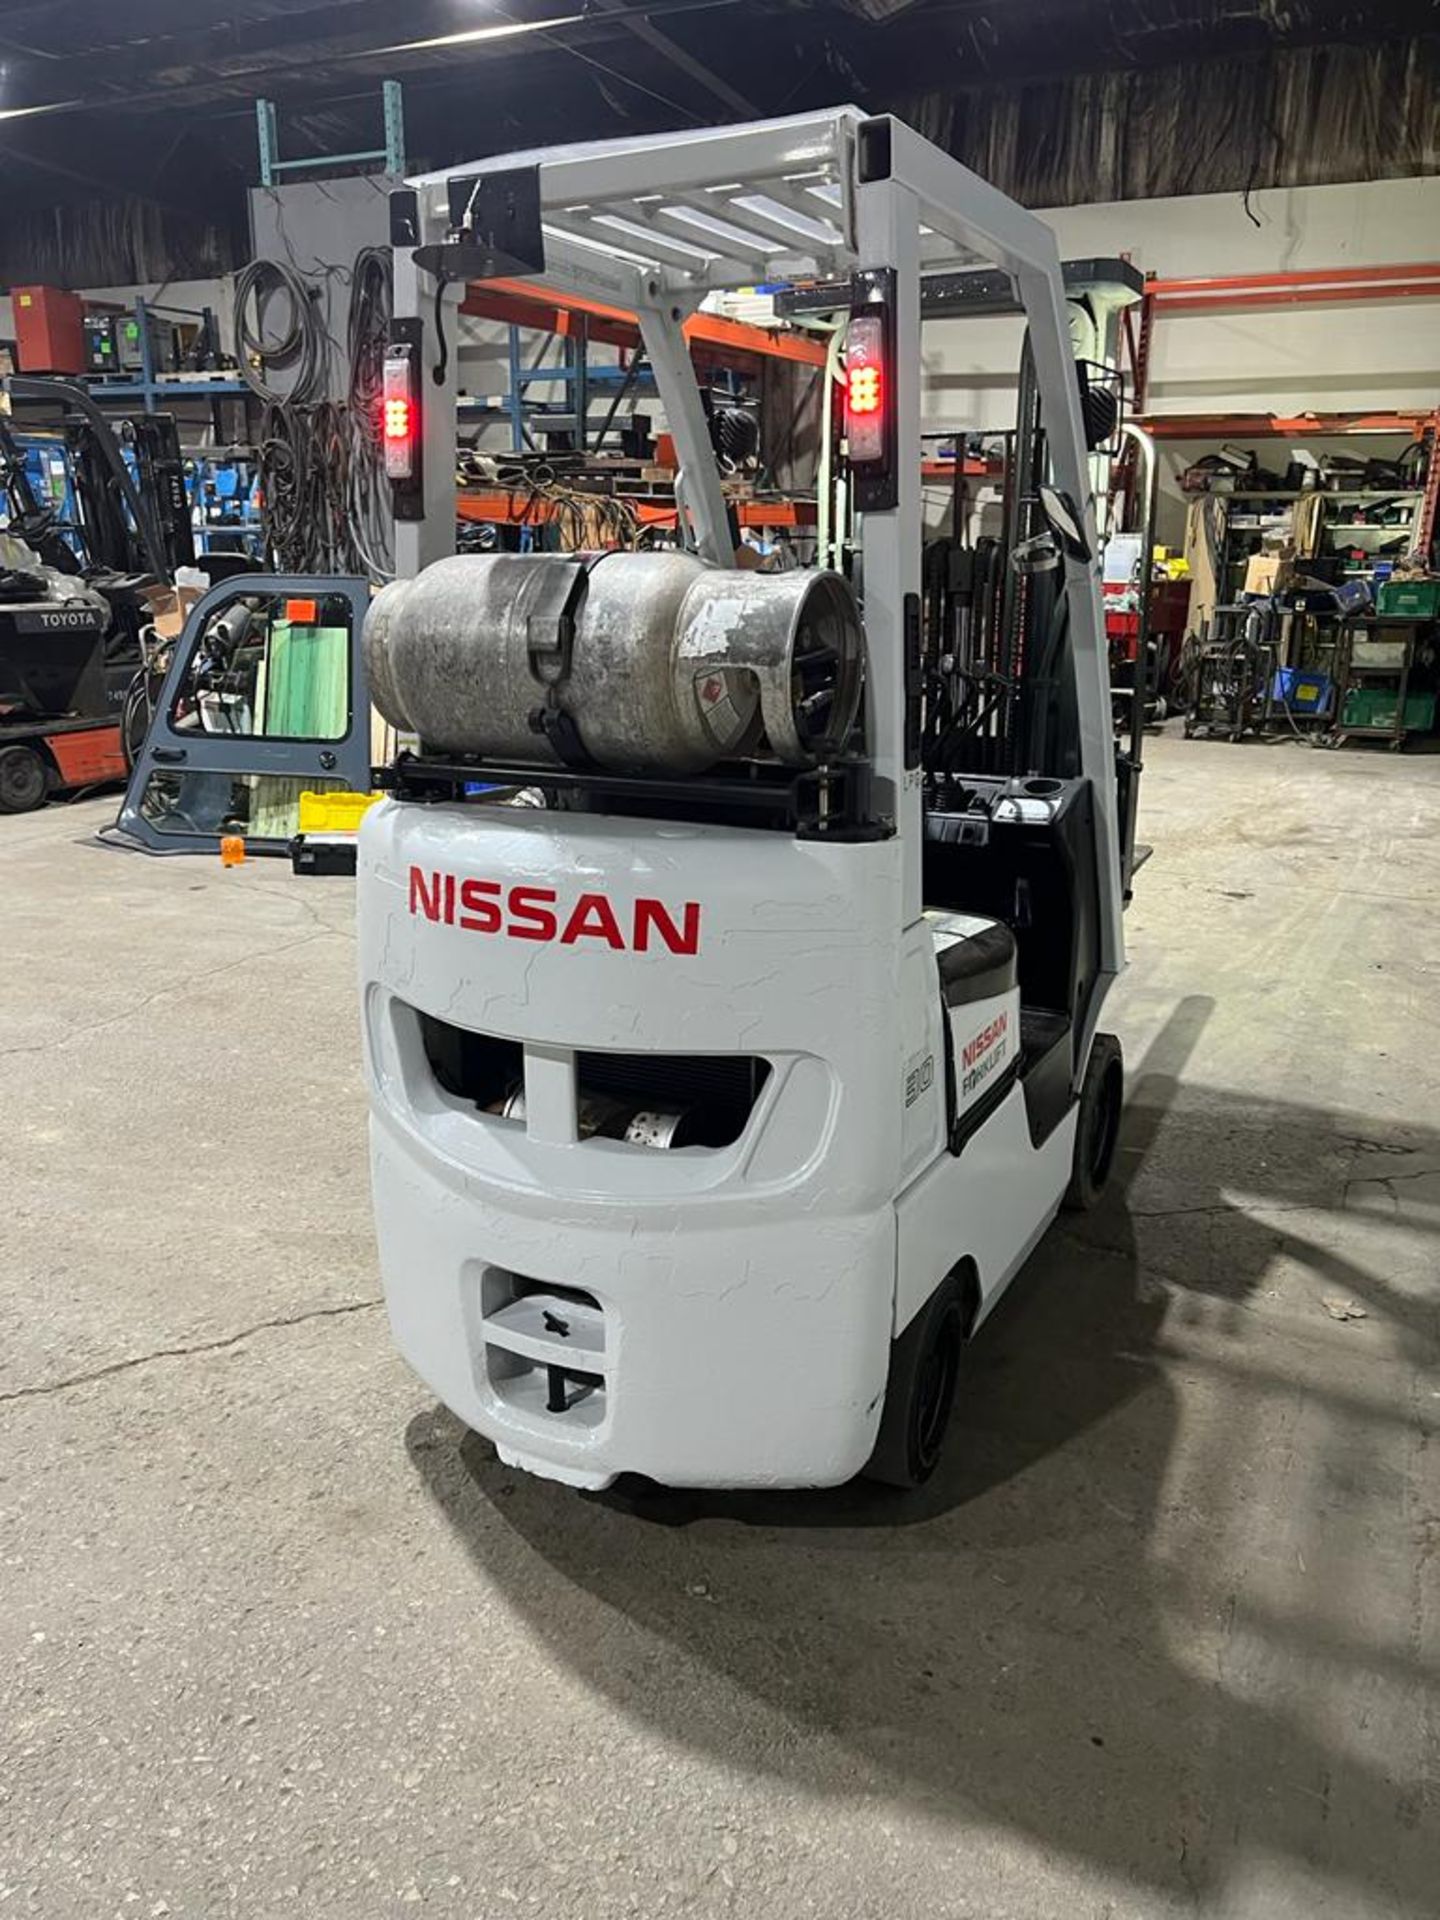 Nissan 3,000lbs Capacity Forklift with Sideshift LPG (propane) with 3-stage mast with LOW HOURS - - Image 2 of 5